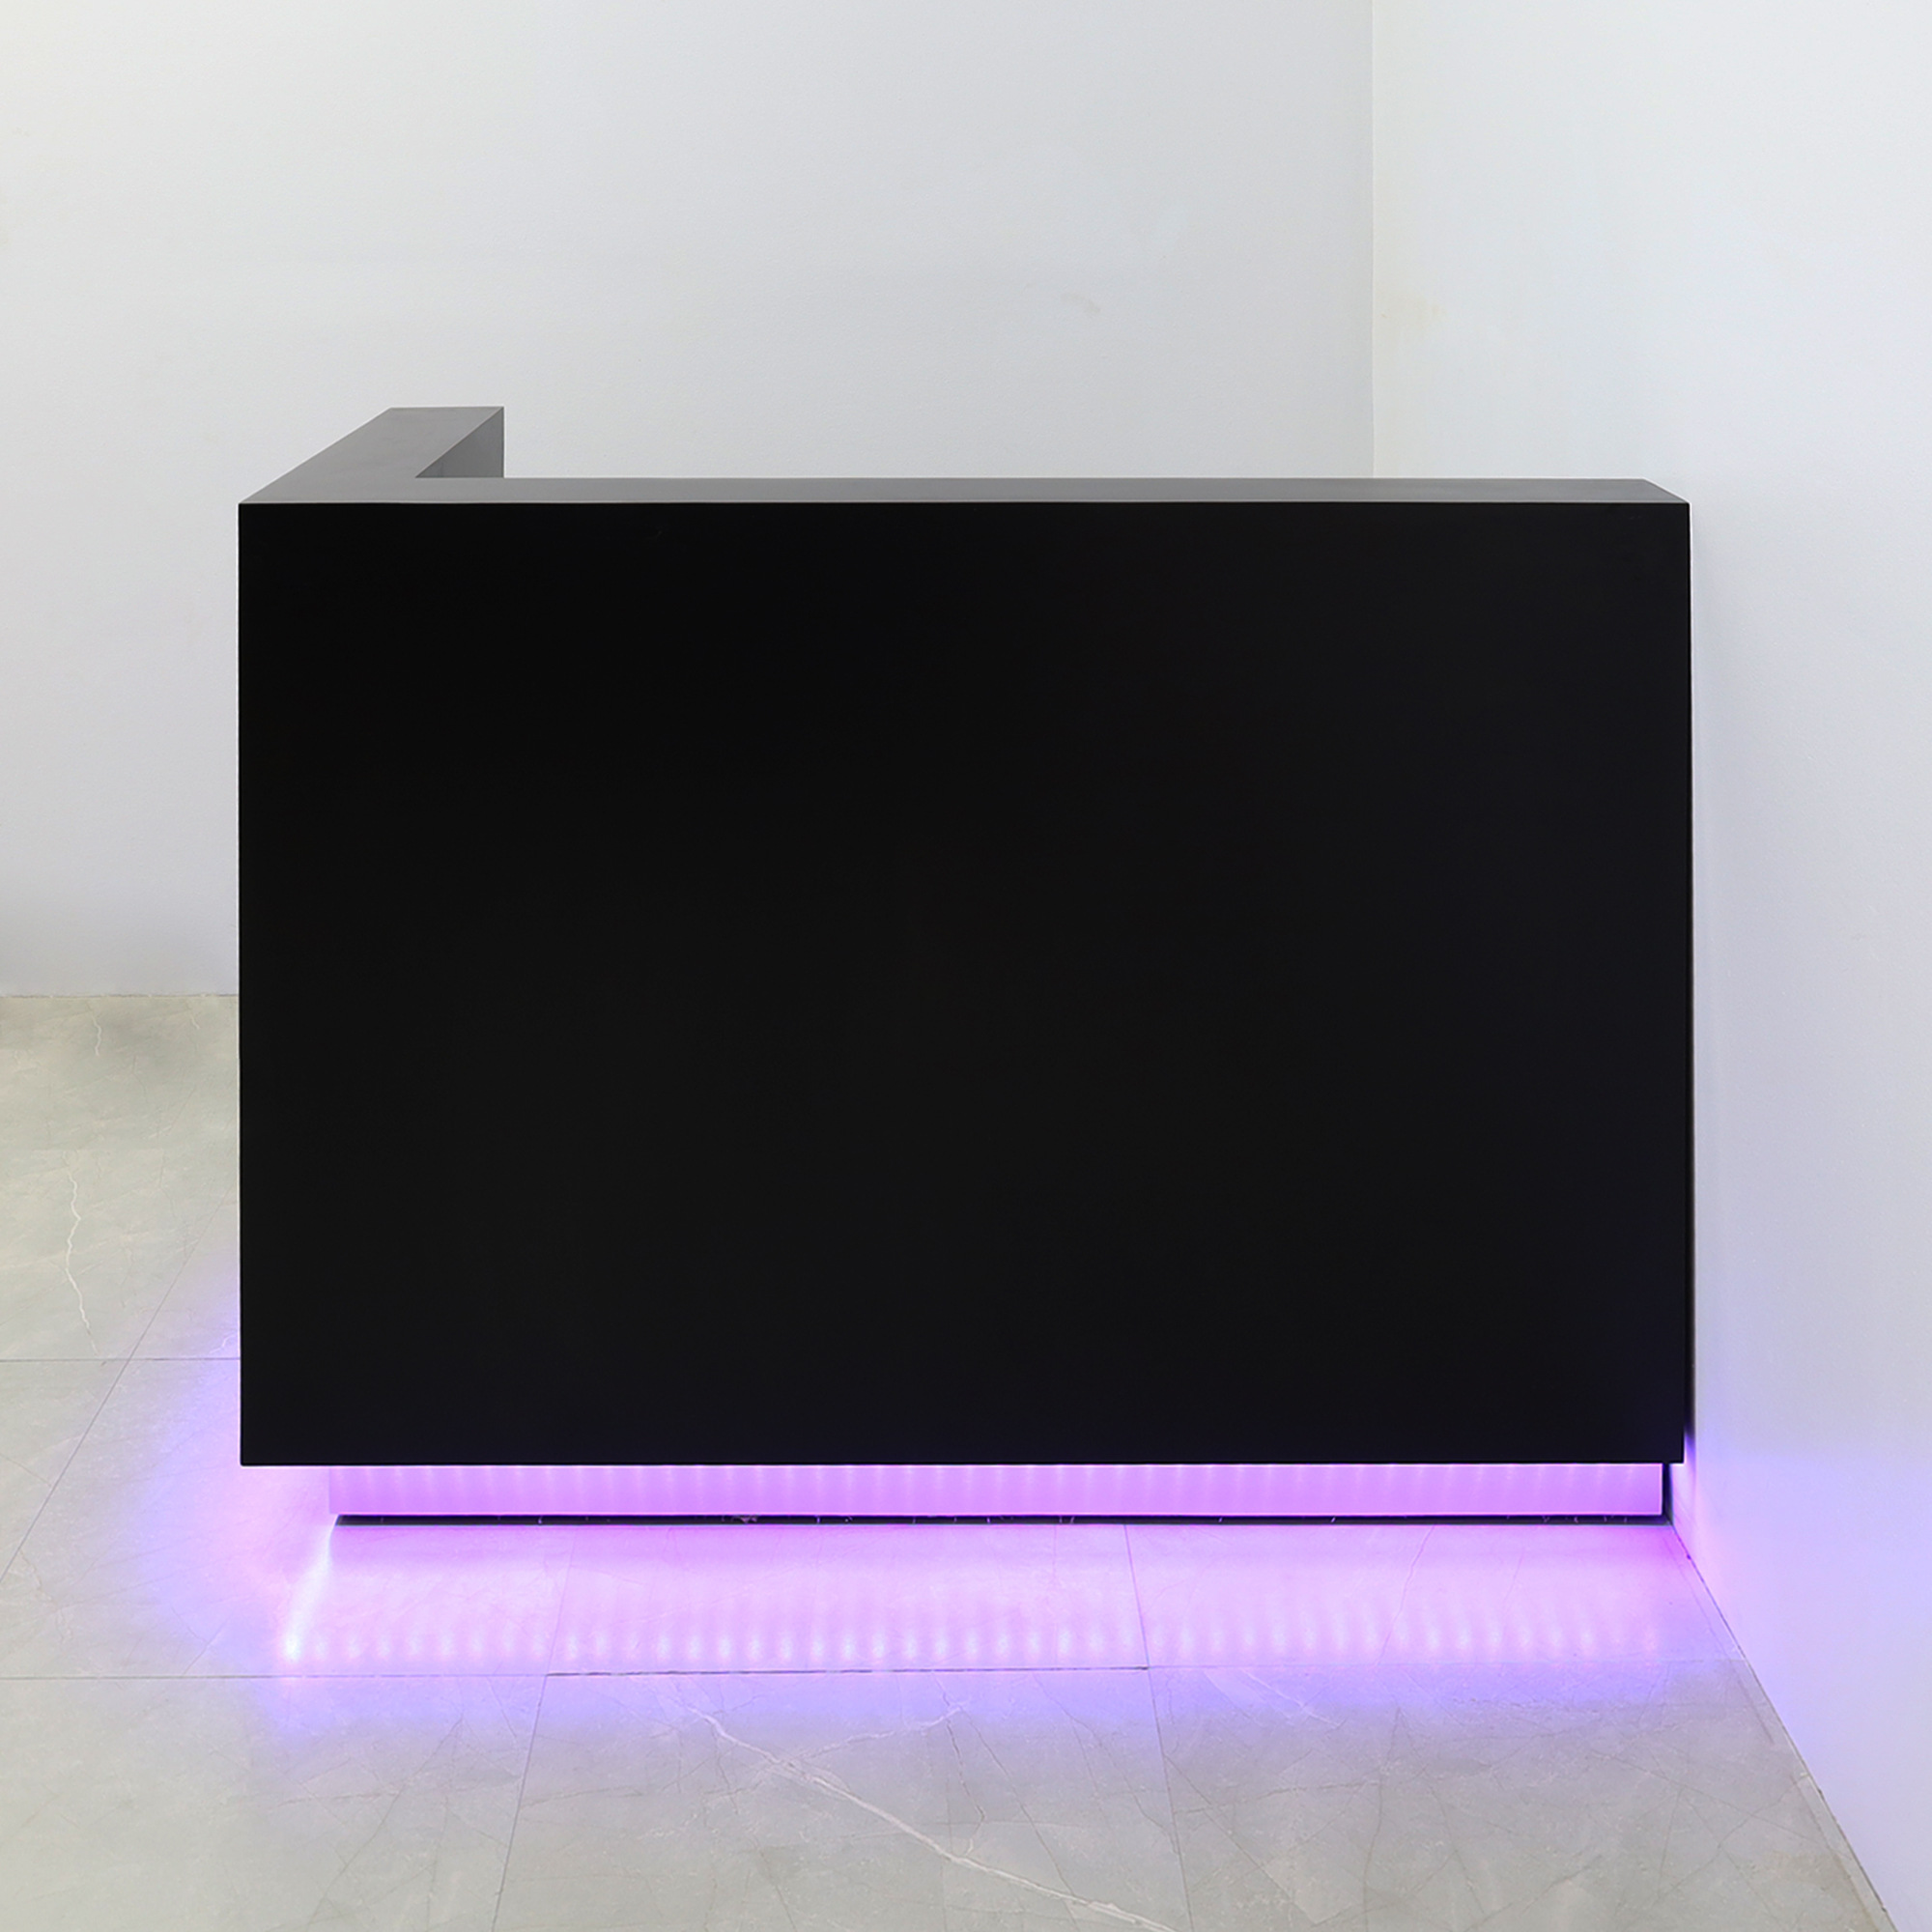 60-inch Dallas L-Shape Custom Reception Desk, left side l-panel when facing front in black matte laminate main desk and brushed aluminum toe-kick, with color LED, shown here.